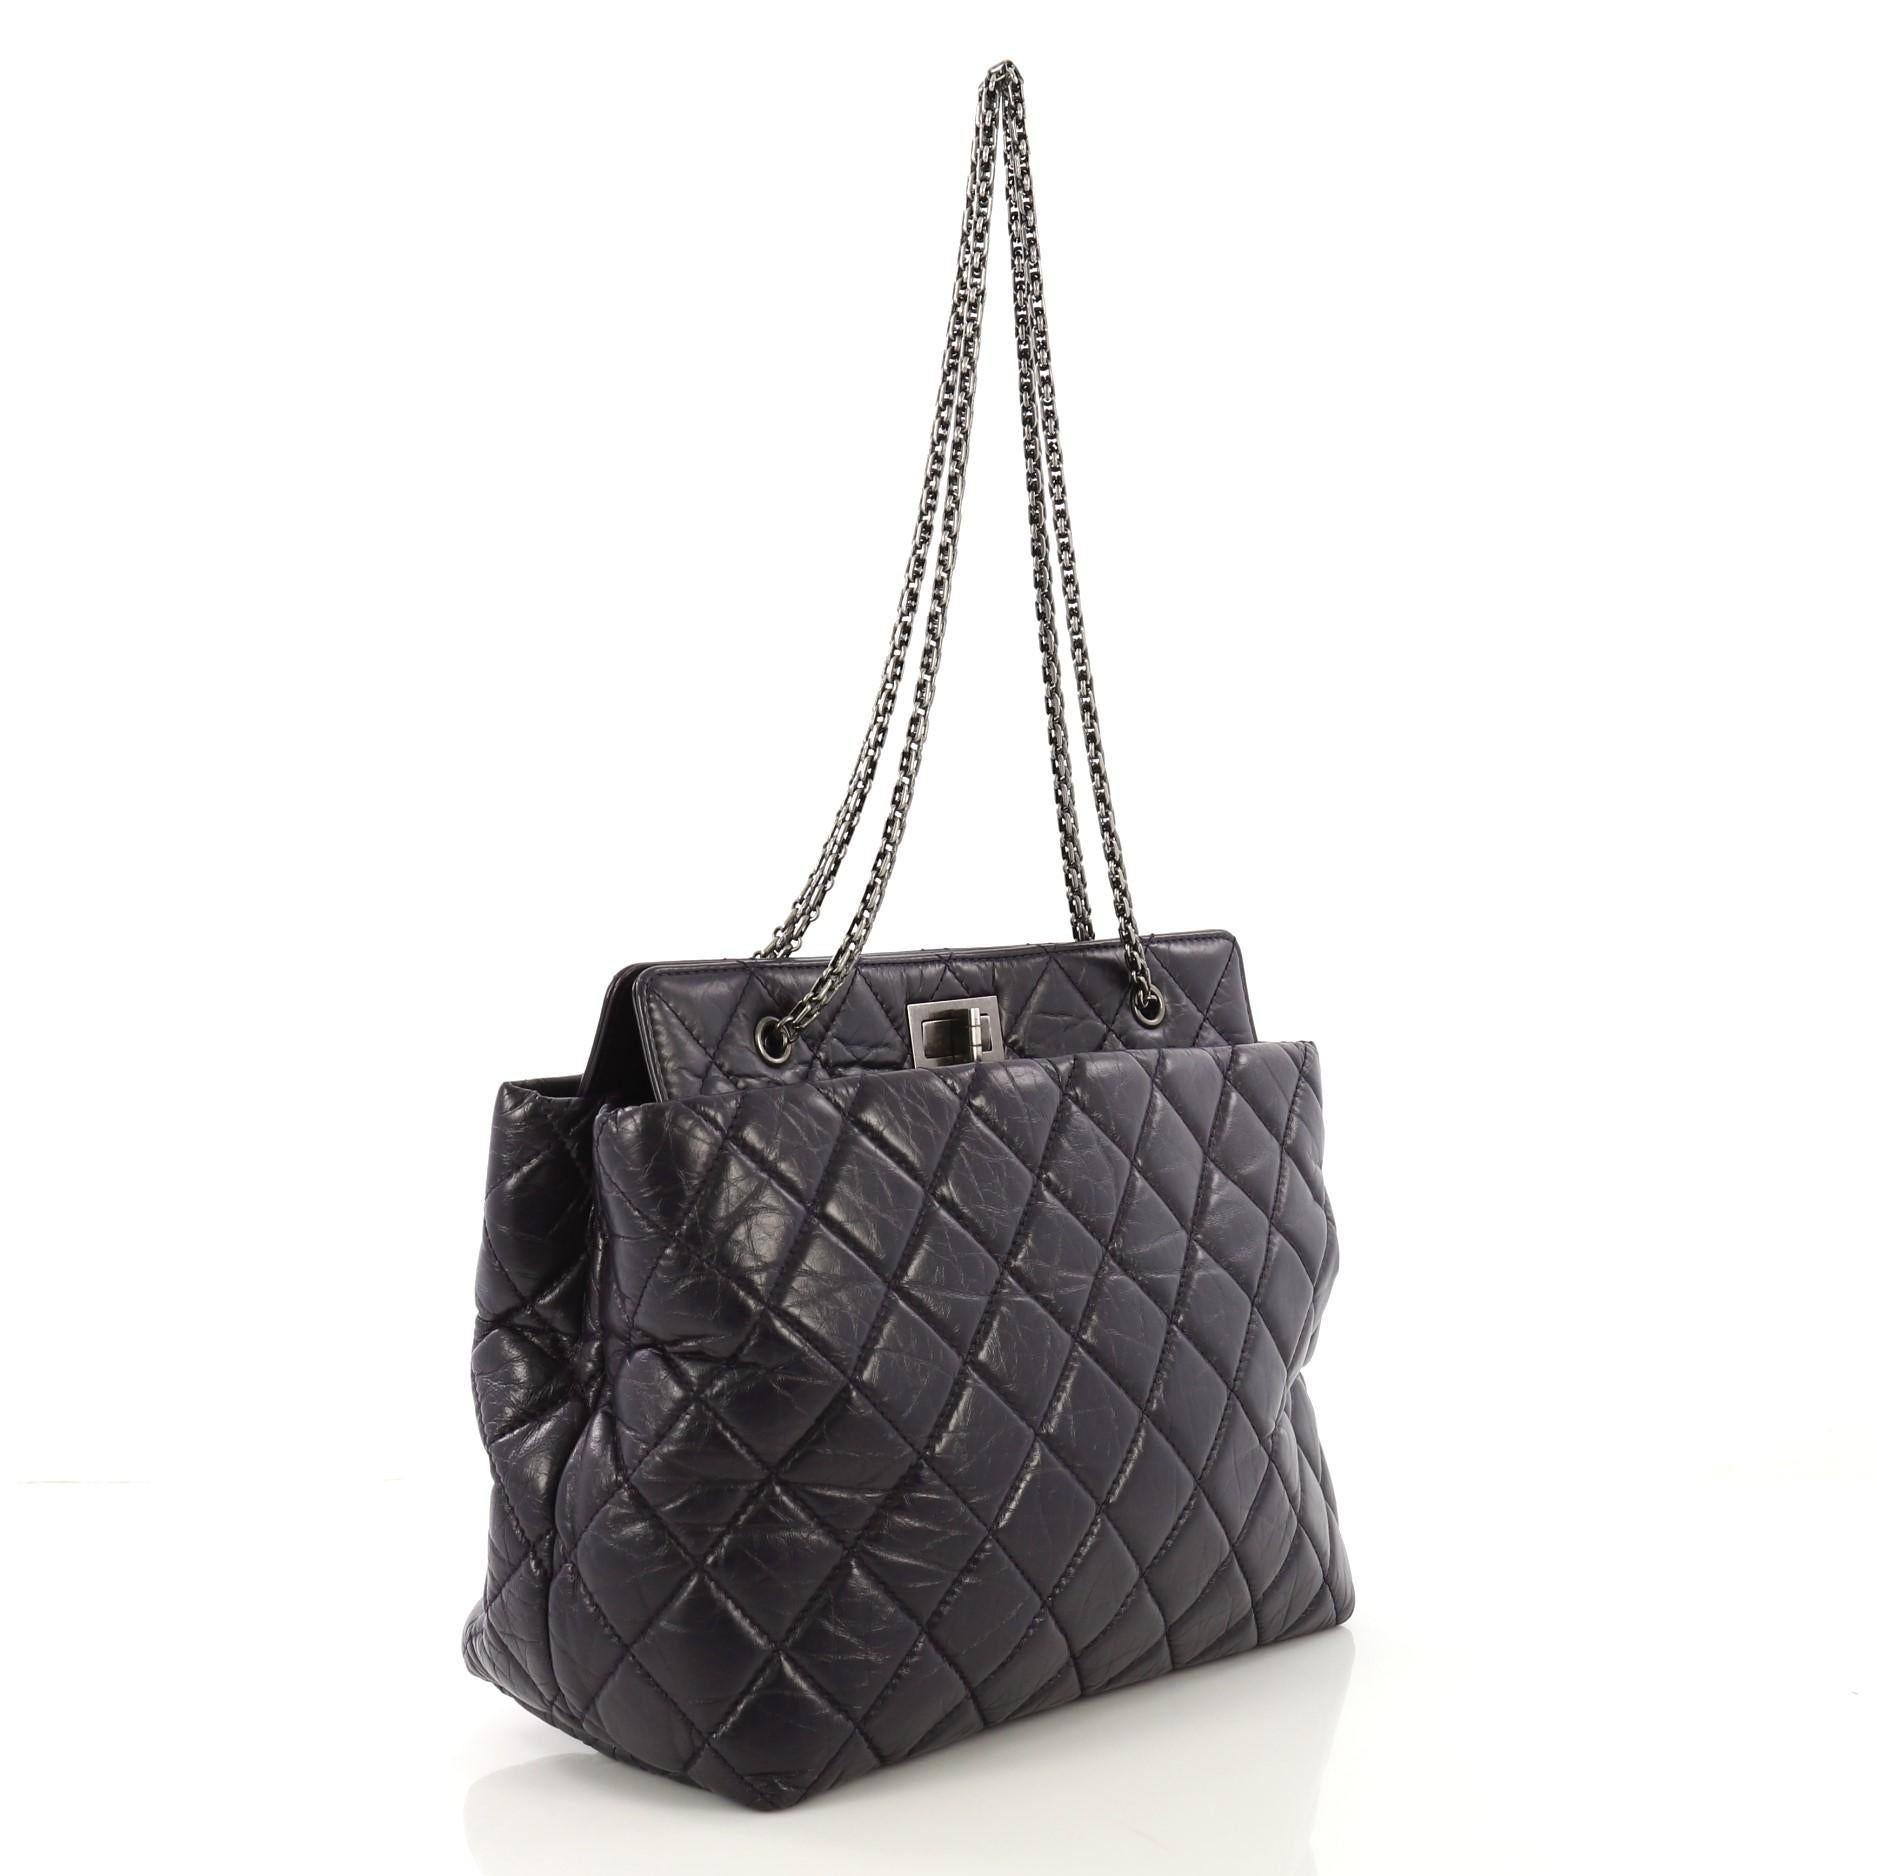 This Chanel Reissue Tote Quilted Aged Calfskin Large, crafted in dark purple quilted aged calfskin leather, features chain link straps and aged gunmetal-tone hardware. Its mademoiselle turn-lock closure opens to a black fabric interior with middle